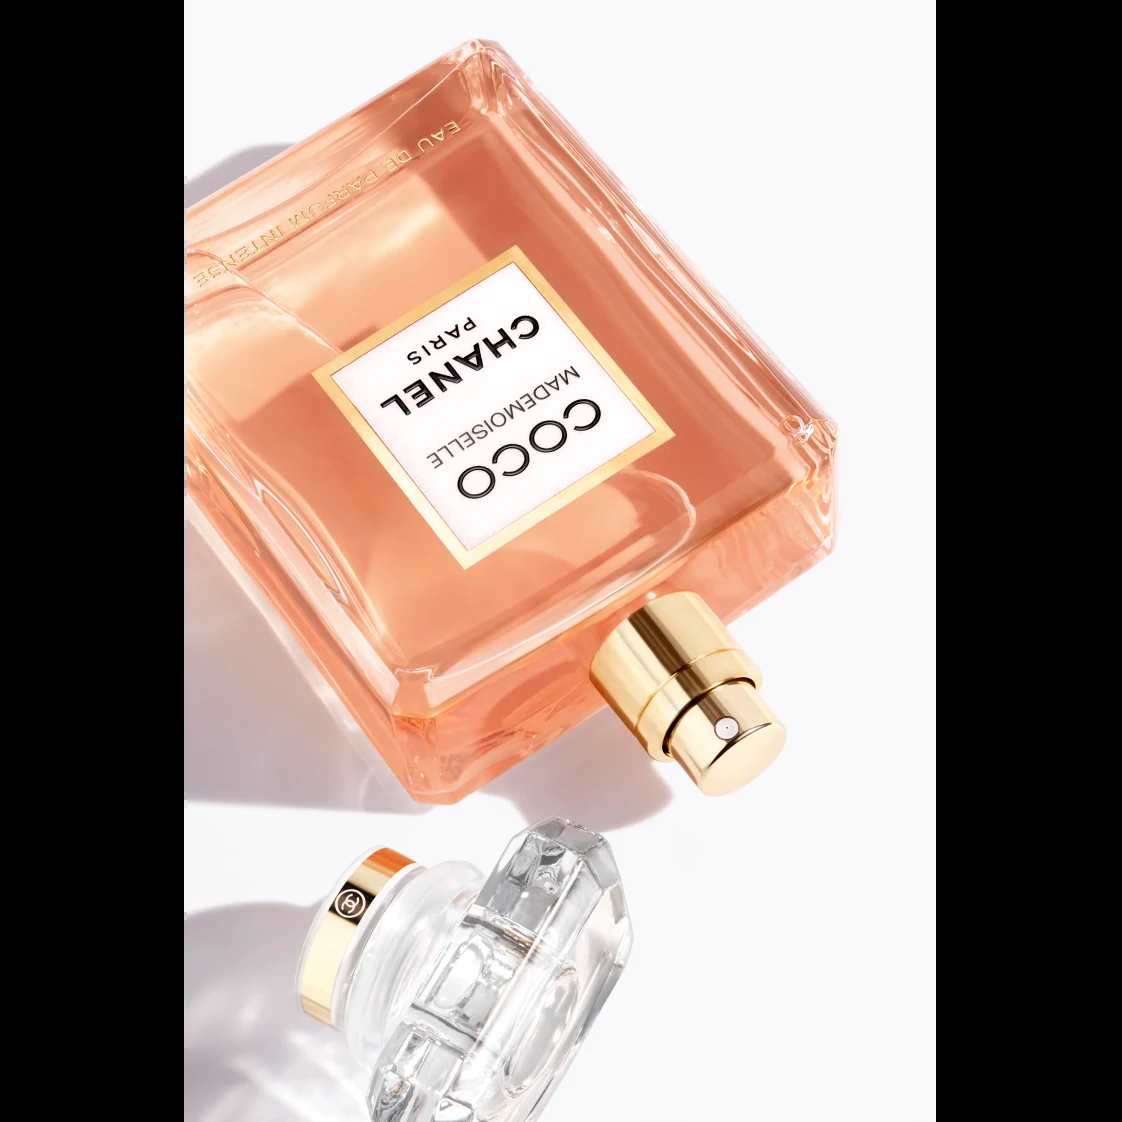 Chanel Coco Mademoiselle